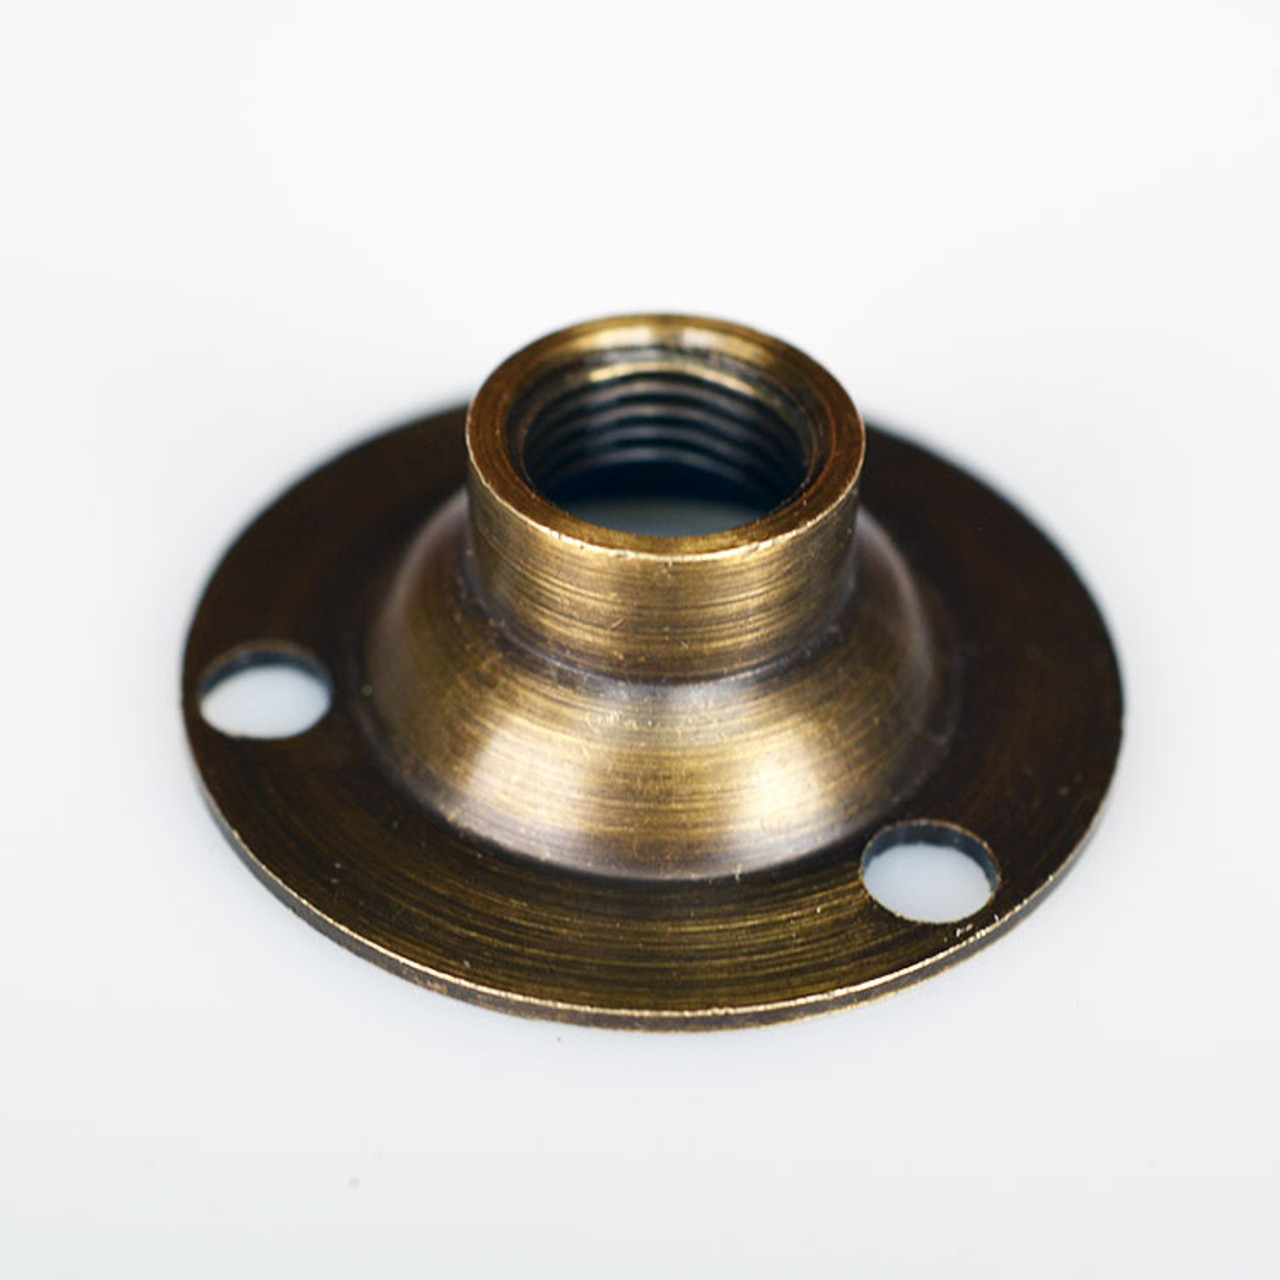 Small Pipe Flange - Antique Brass